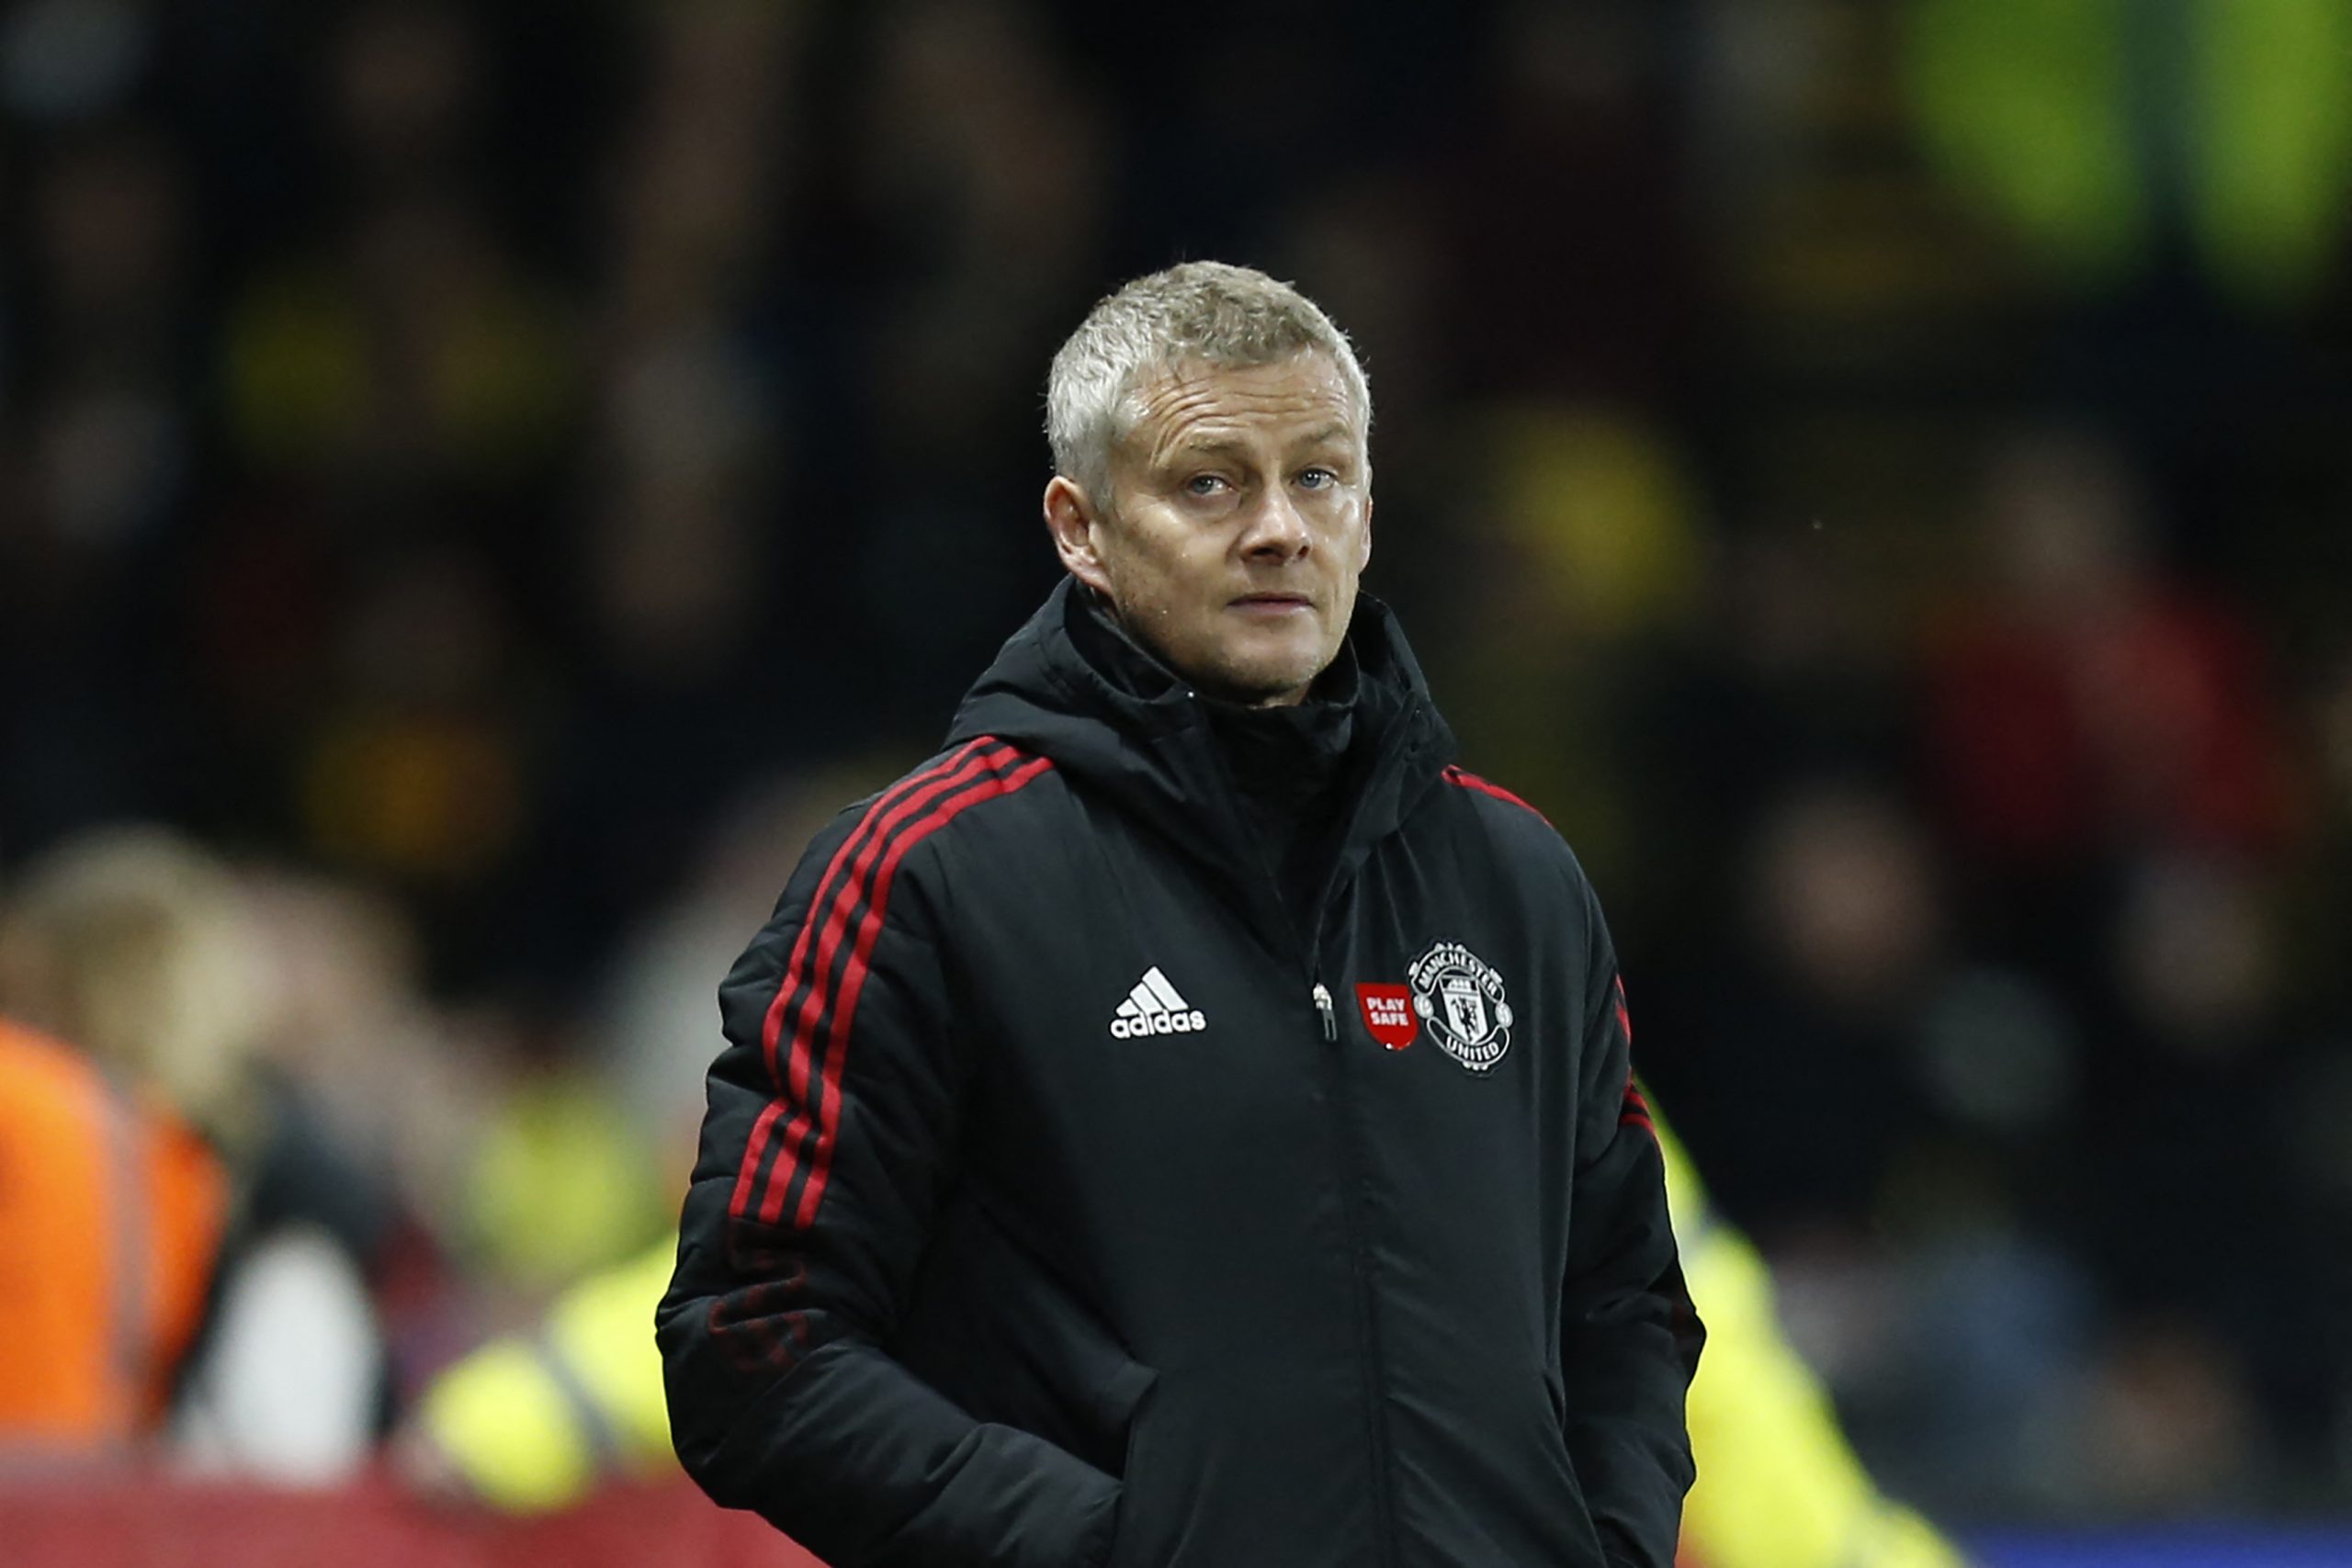 Manchester United's Norwegian manager Ole Gunnar Solskjaer reacts during the English Premier League football match between Watford and Manchester United at Vicarage Road Stadium in Watford, southeast England, on November 20, 2021.